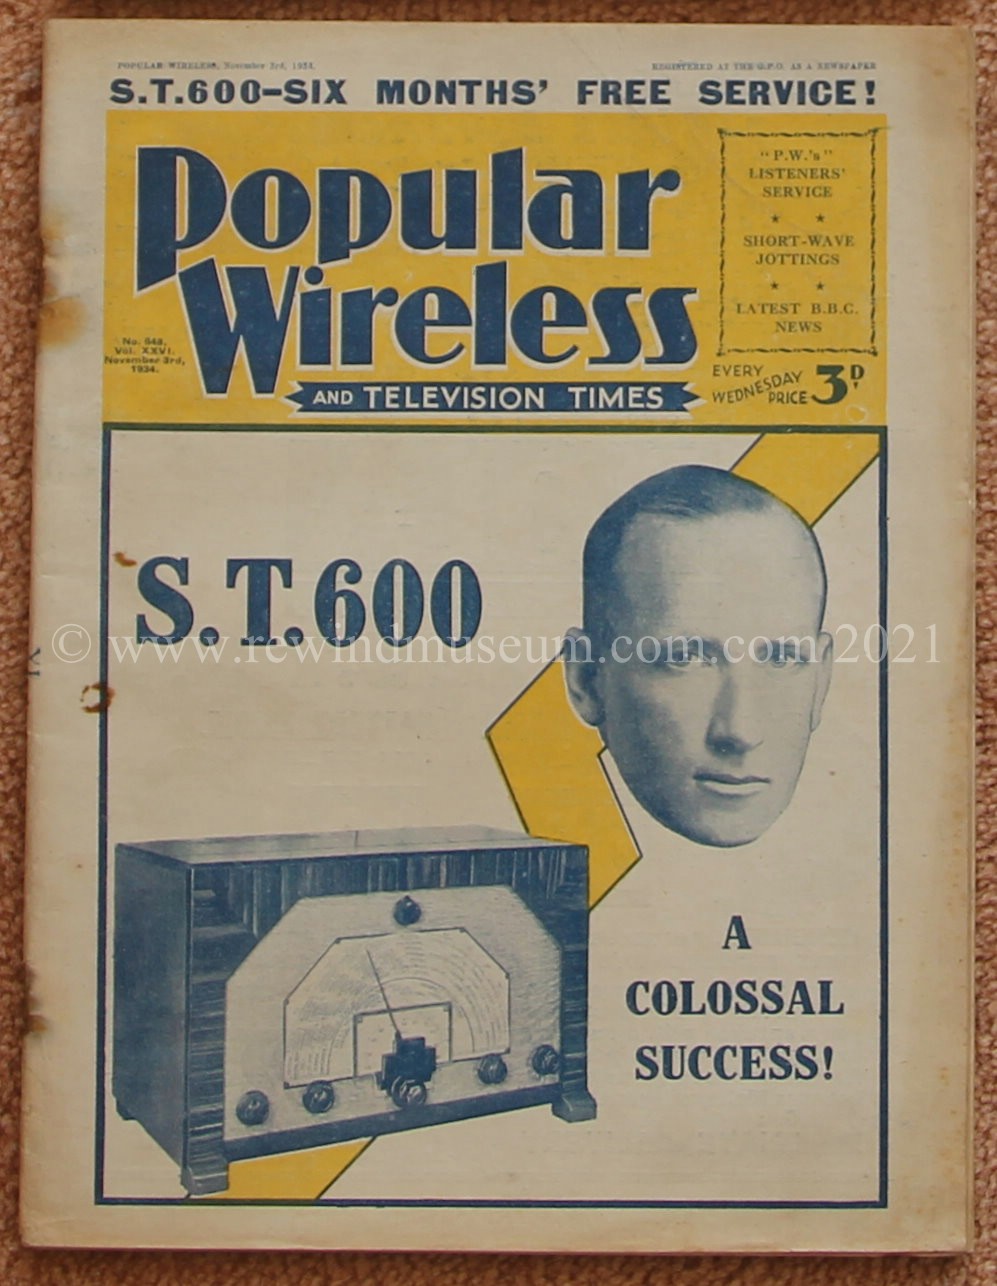 Popular Wireless and Television Times